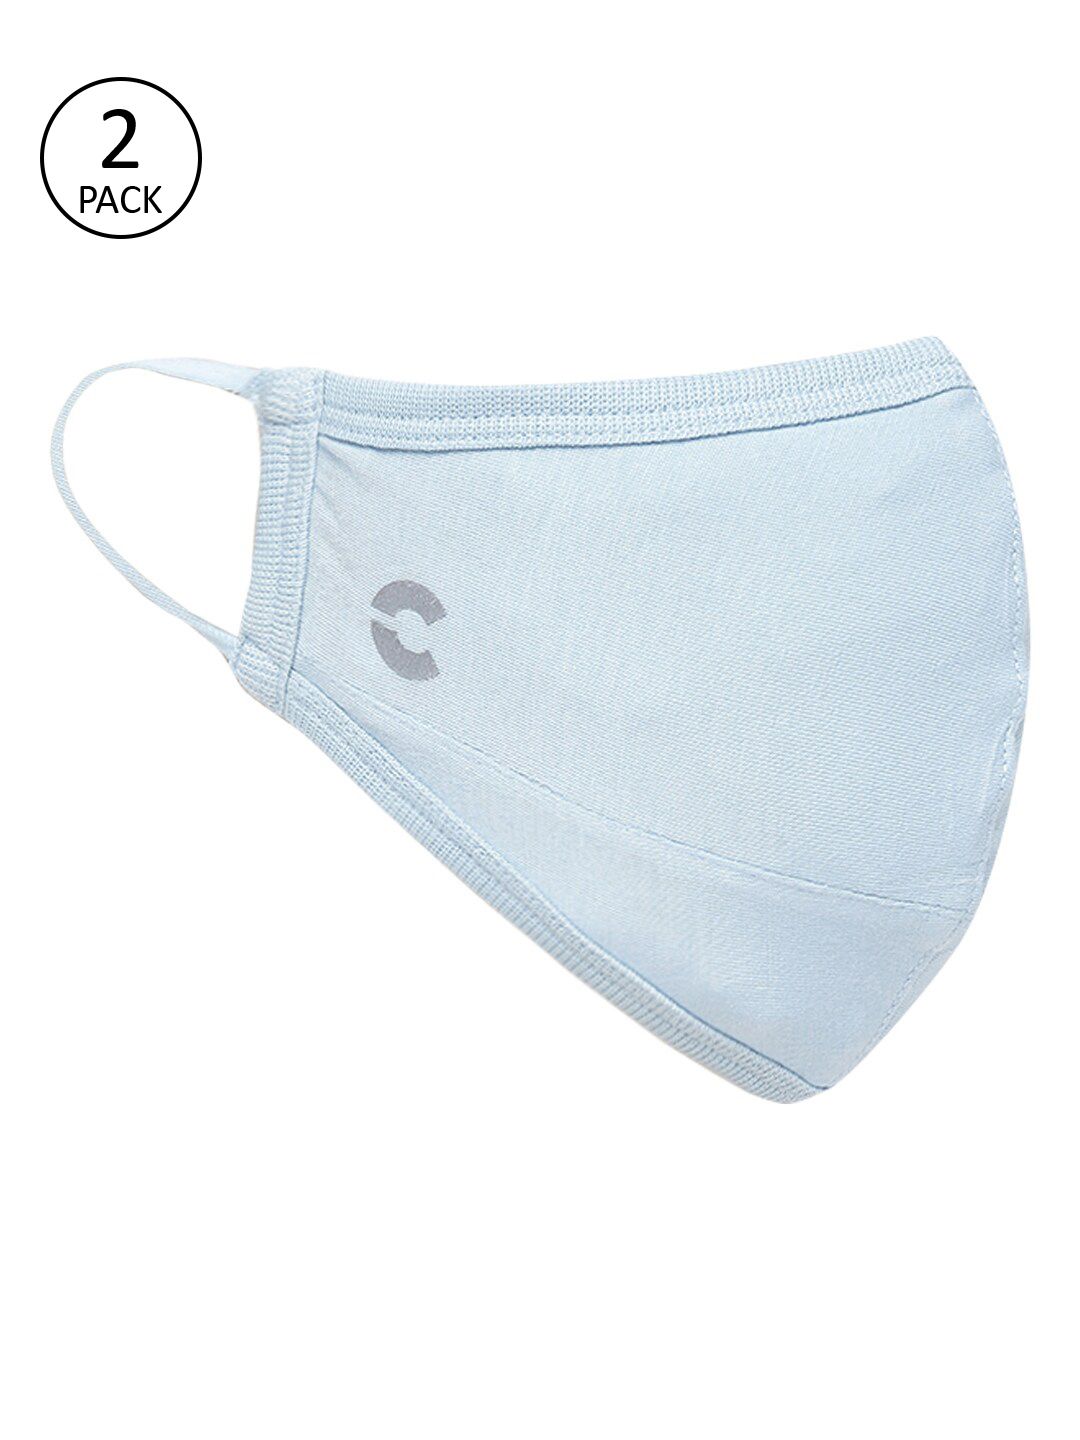 FREECULTR Pack of 2 Anti-Microbial Bamboo Cotton 5-Ply Comfort Fit Reusable Cloth Masks Price in India